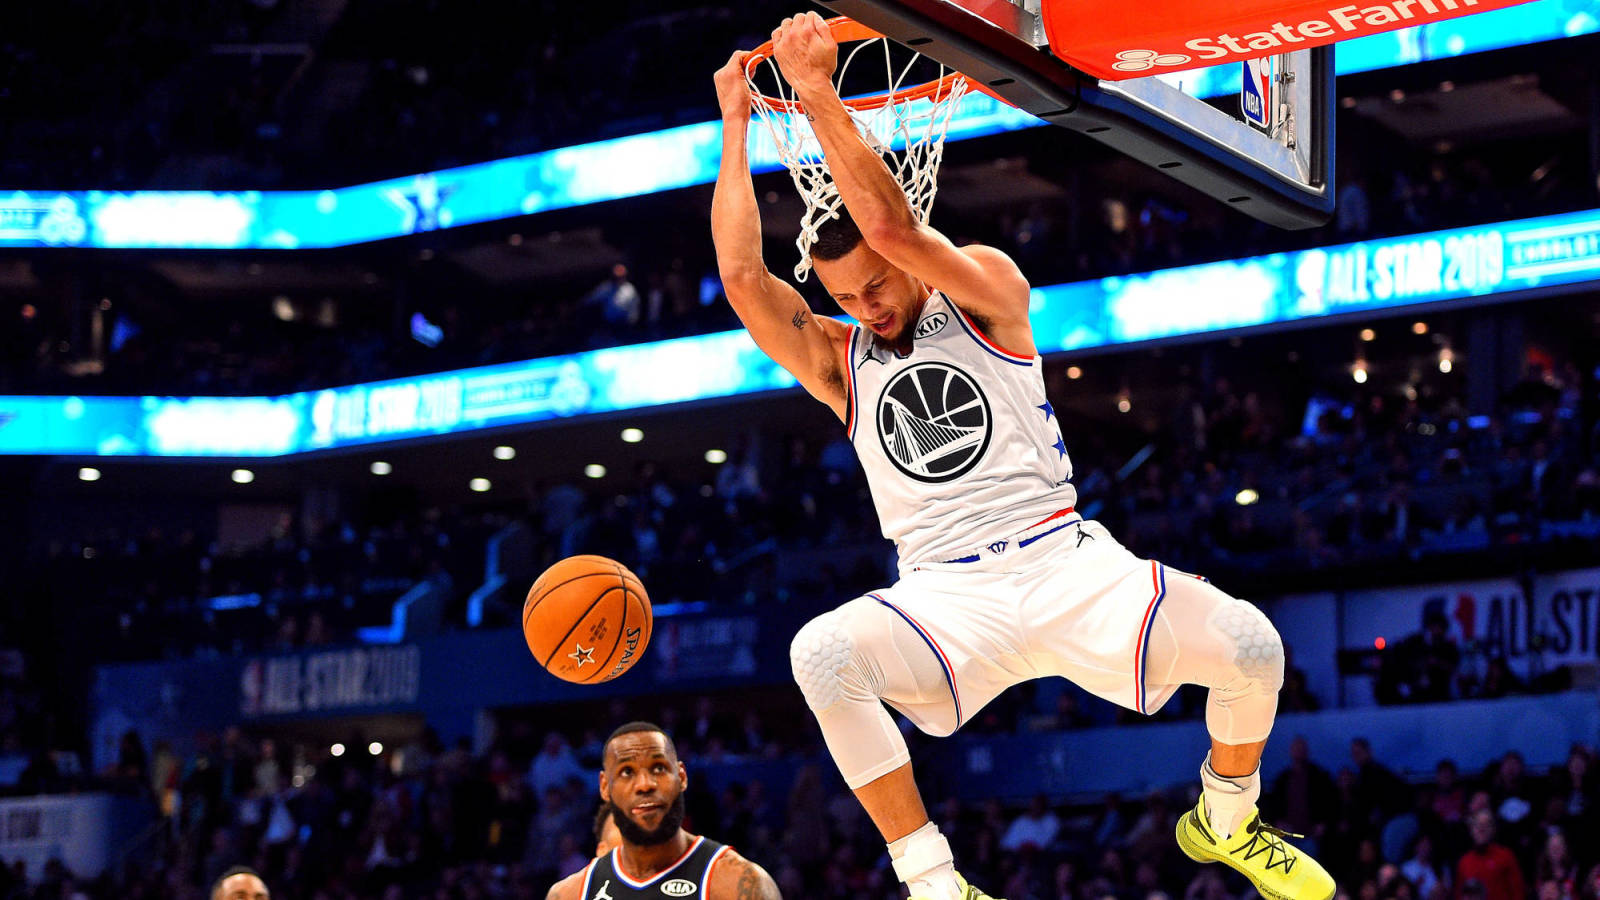 Stephen Curry: All Star Game Slam Makes Up For January Dunk Fail